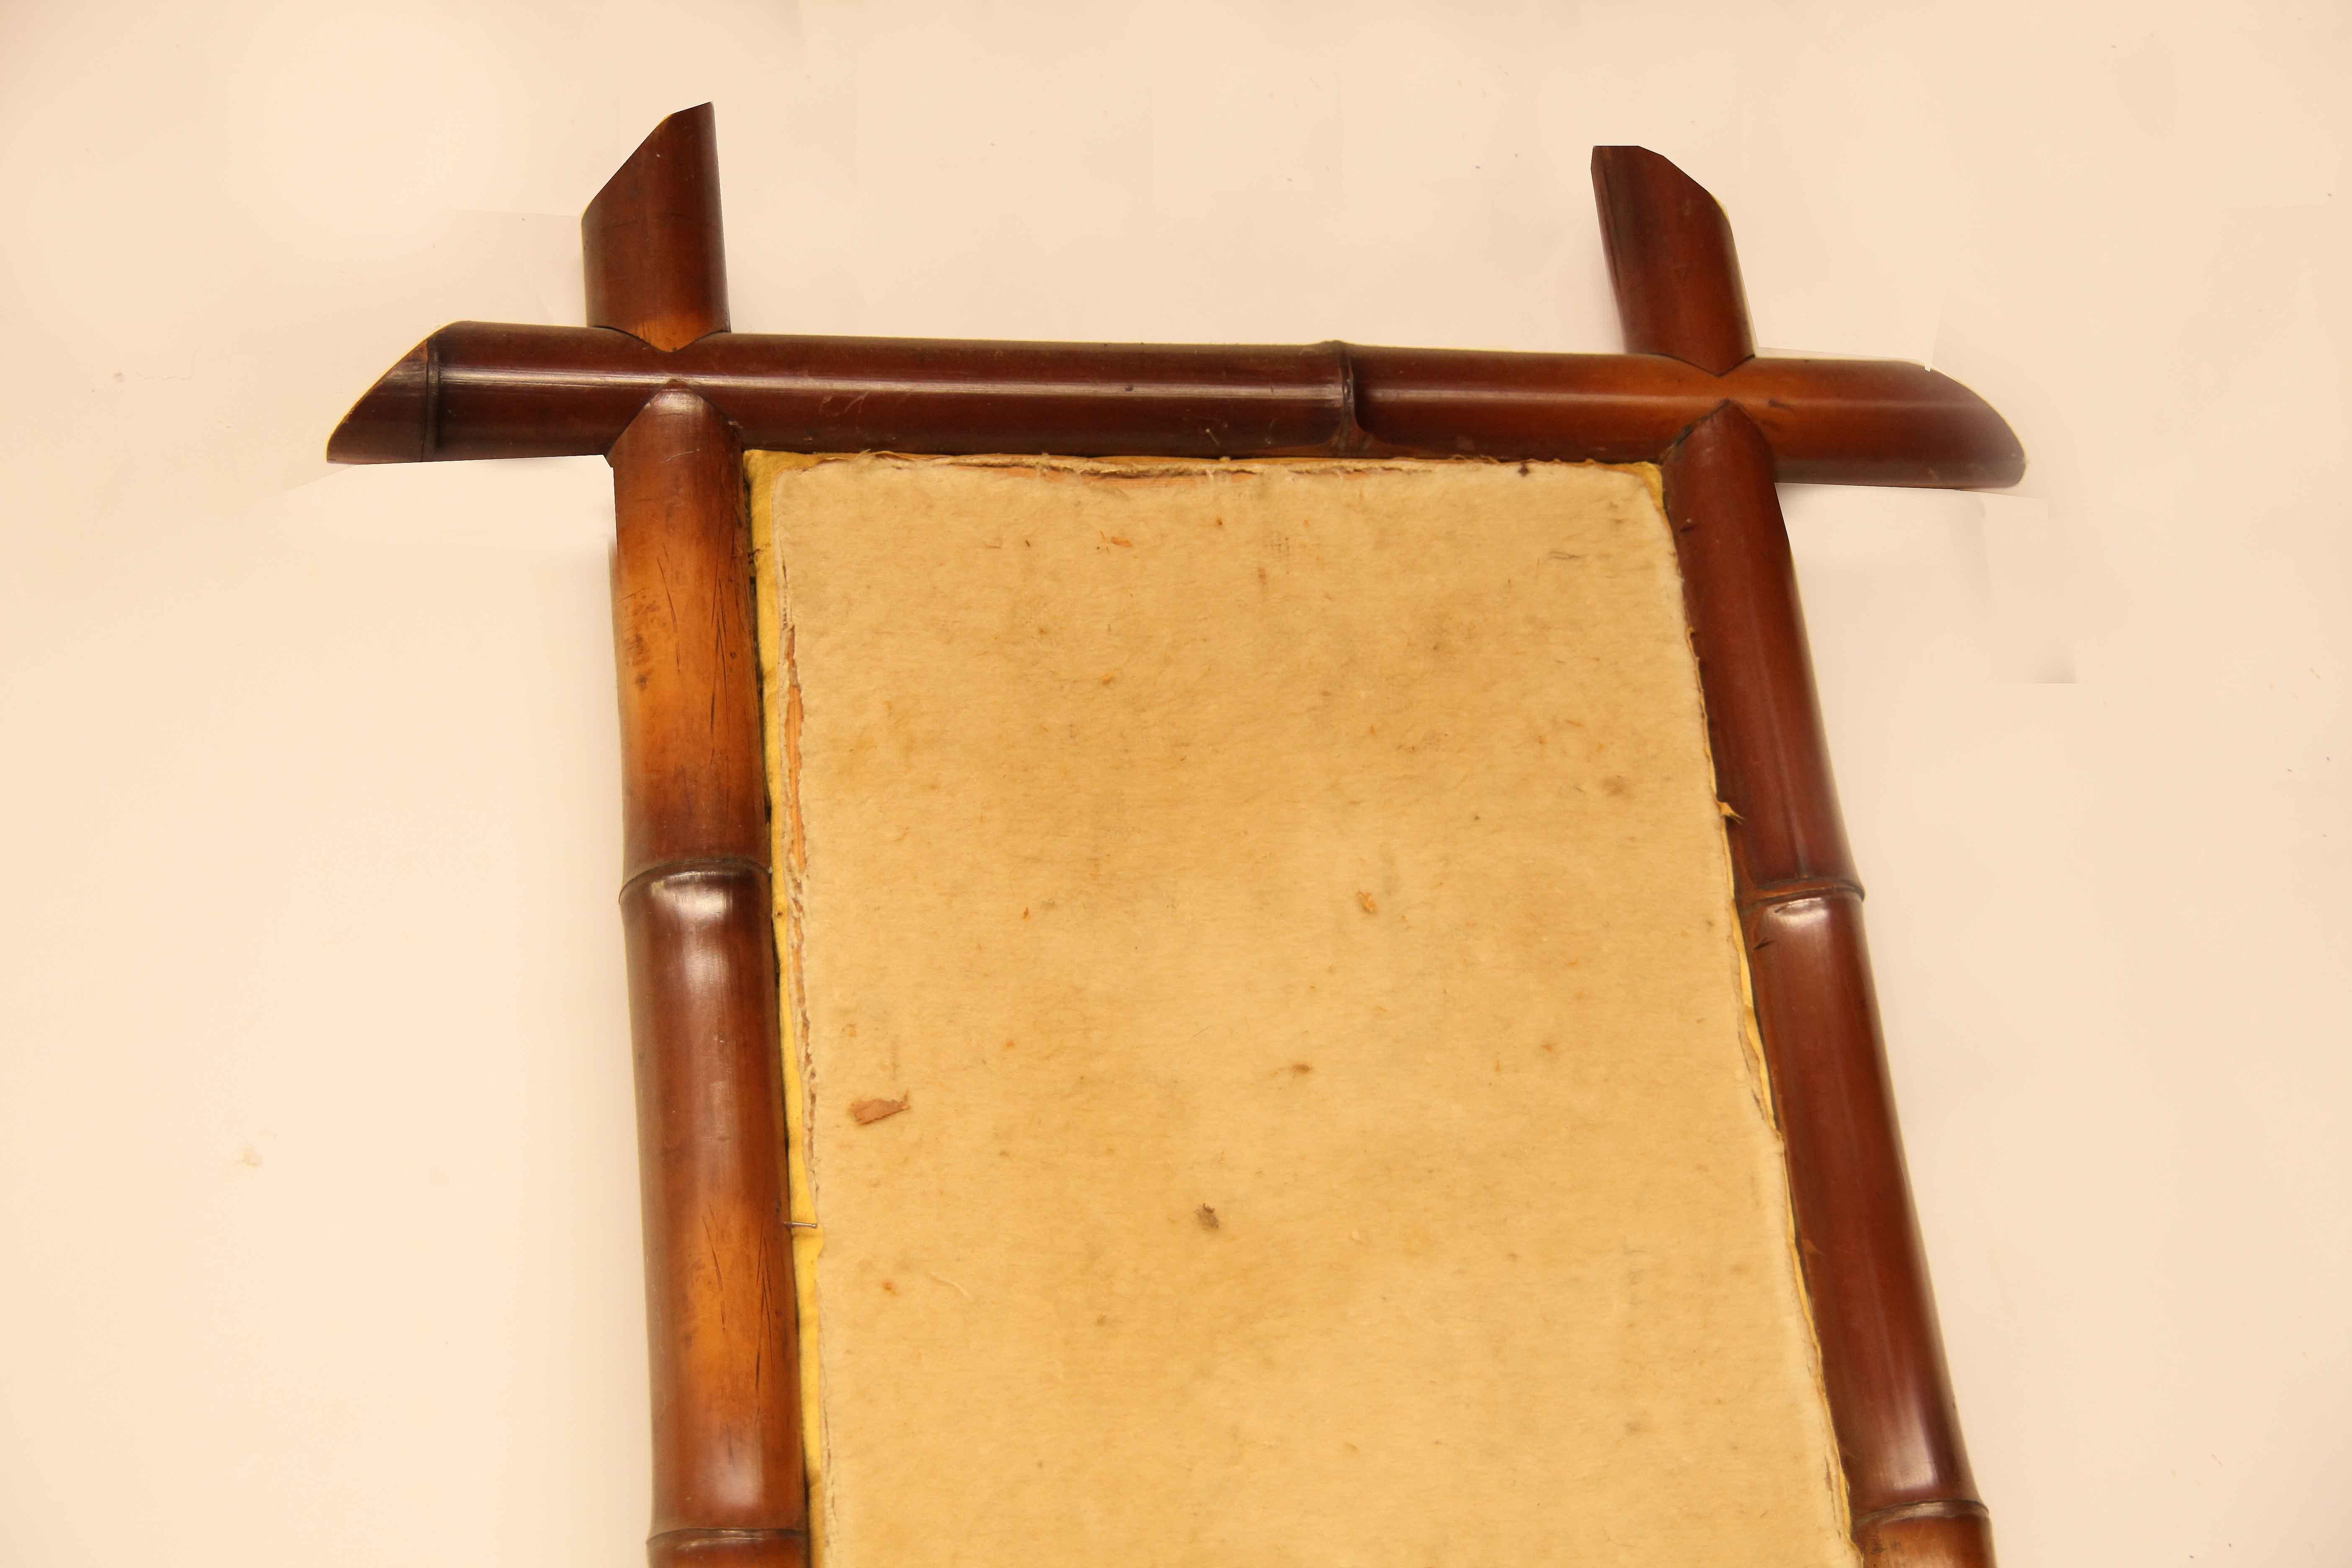 English Victorian bamboo frame with original cloth mounted on a pine stretcher; it retains the original bamboo loops for hanging ( but one has some wear so probably ill advised to use), there are metal swivel hooks attached at each end for vertical